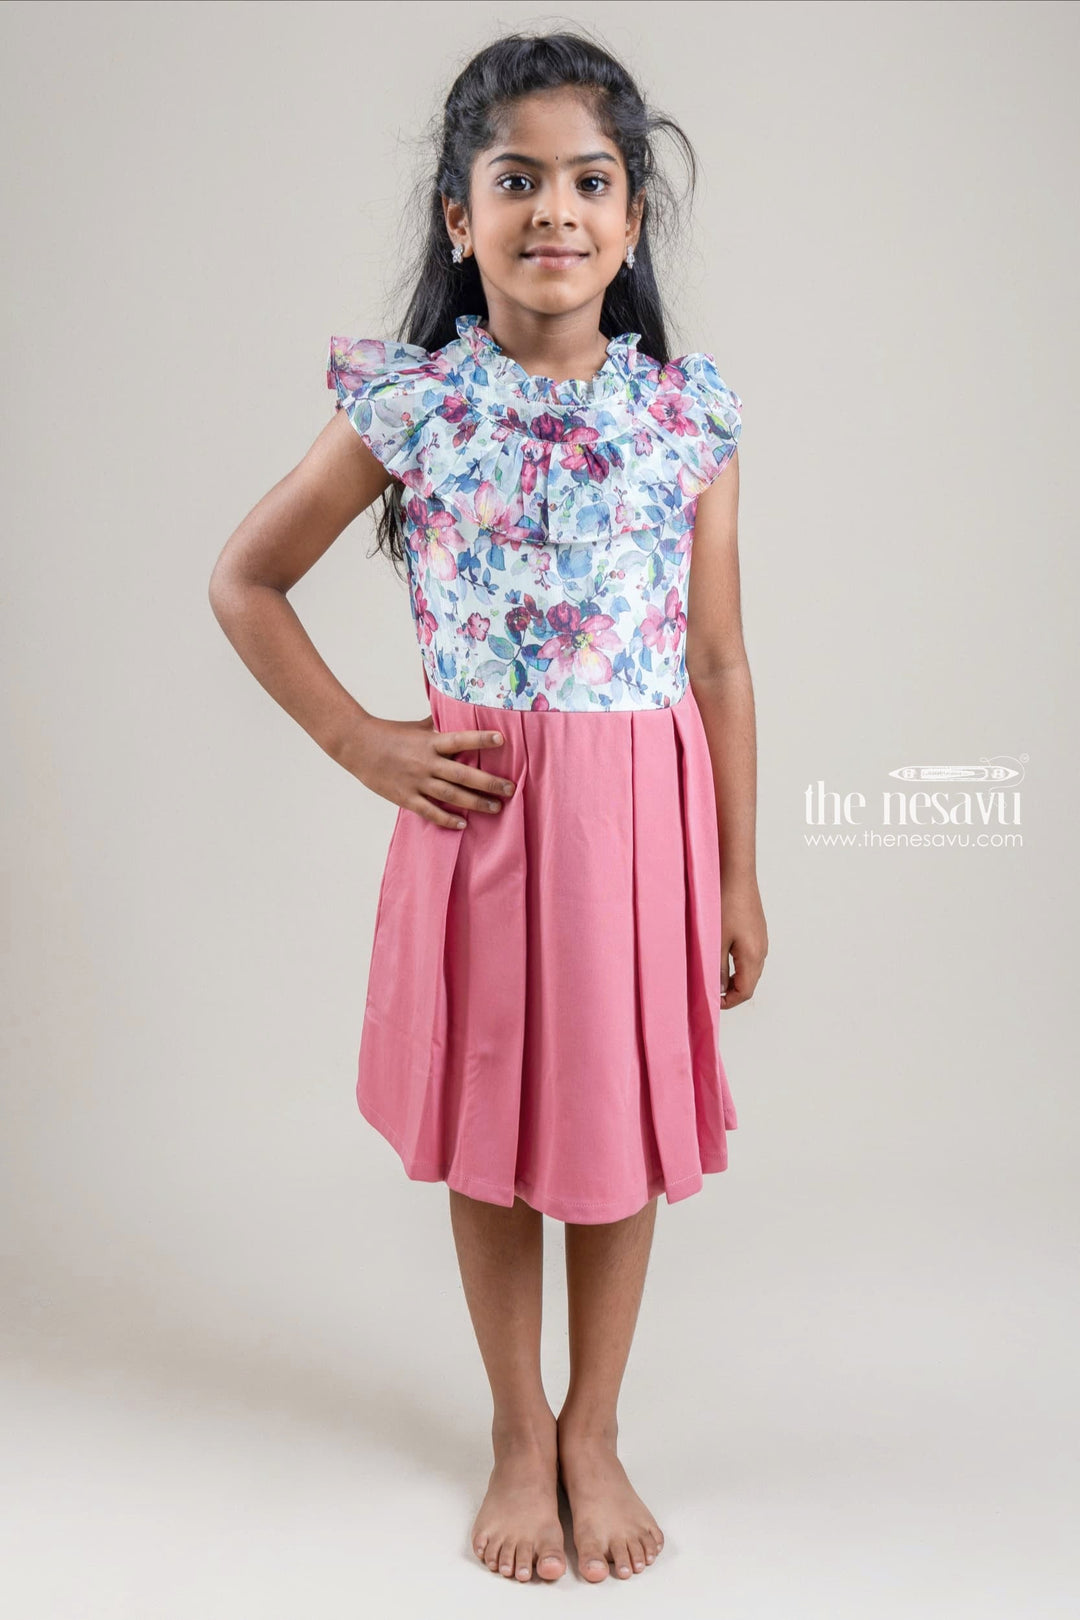 The Nesavu Girls Fancy Frock Floral Printed Flared and Pleated Neck Sleeveless Green Top and Knife Pleated Salmon Pink Skirt with Waist Belt Nesavu 24 (5Y) / Salmon / Chiffon GFC1062A-24 Green Floral Printed Flared Top and Salmon Pink Knife Pleated Skirt for Girls | The Nesavu